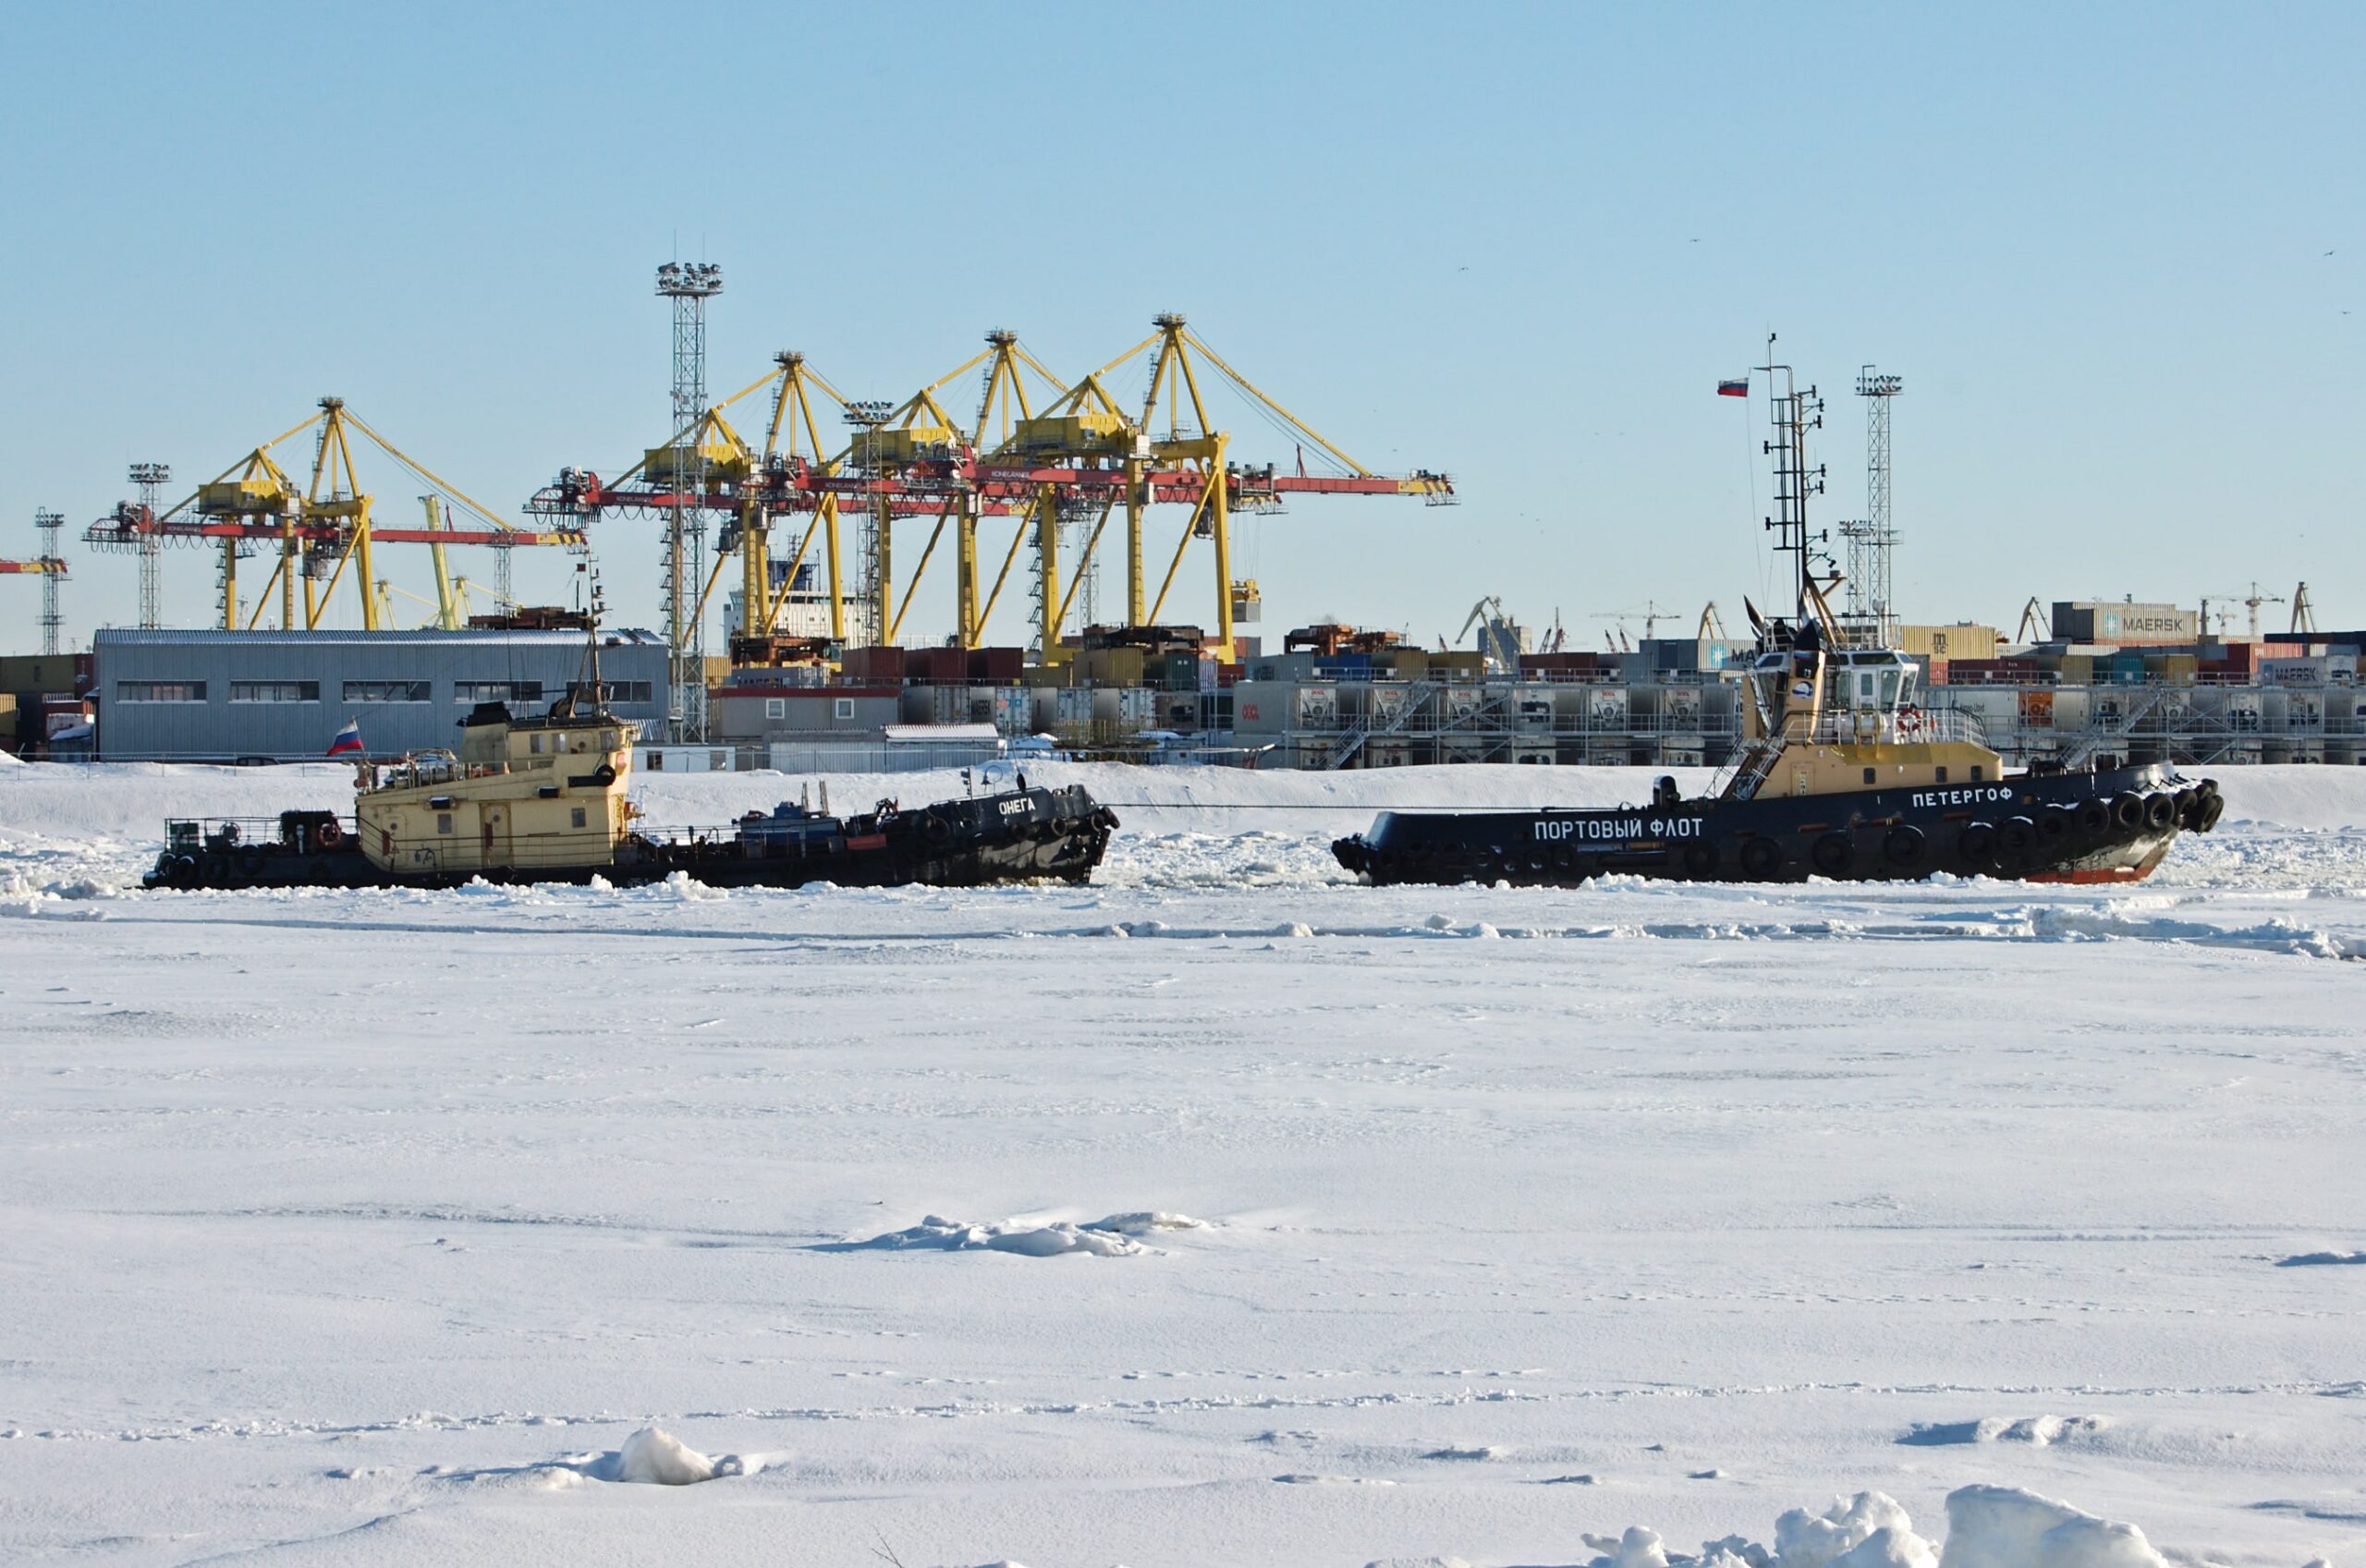 Two Russian boats in front of the container terminal within the Saint Petersburg seaport, surrounded by snow and ice